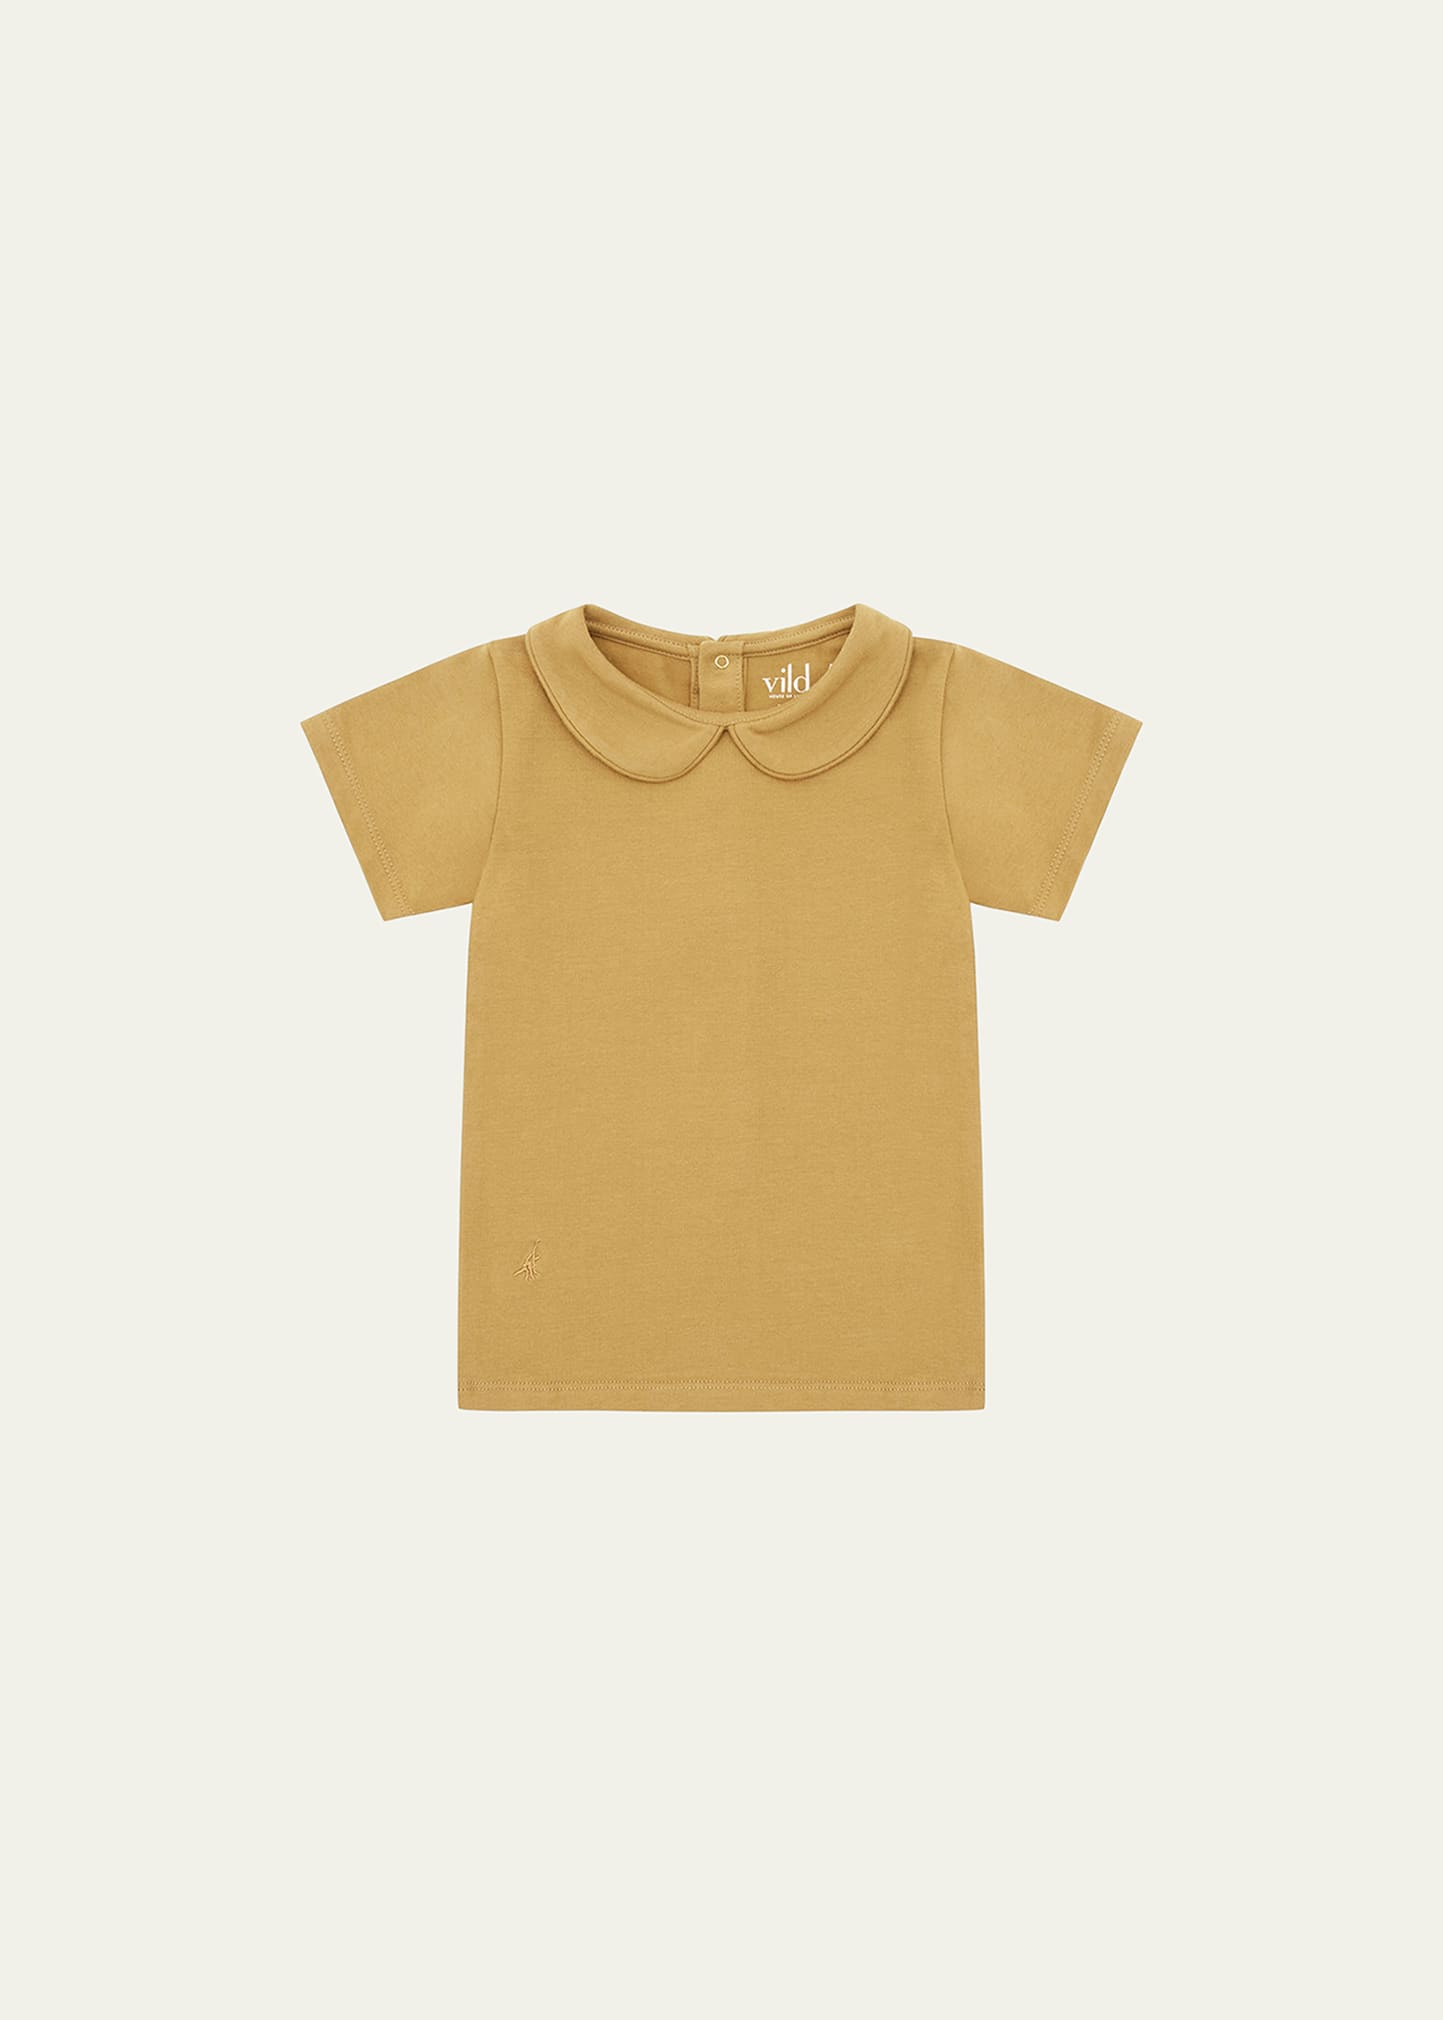 Vild - House Of Little Kid's Woven Collared Shirt In Camel